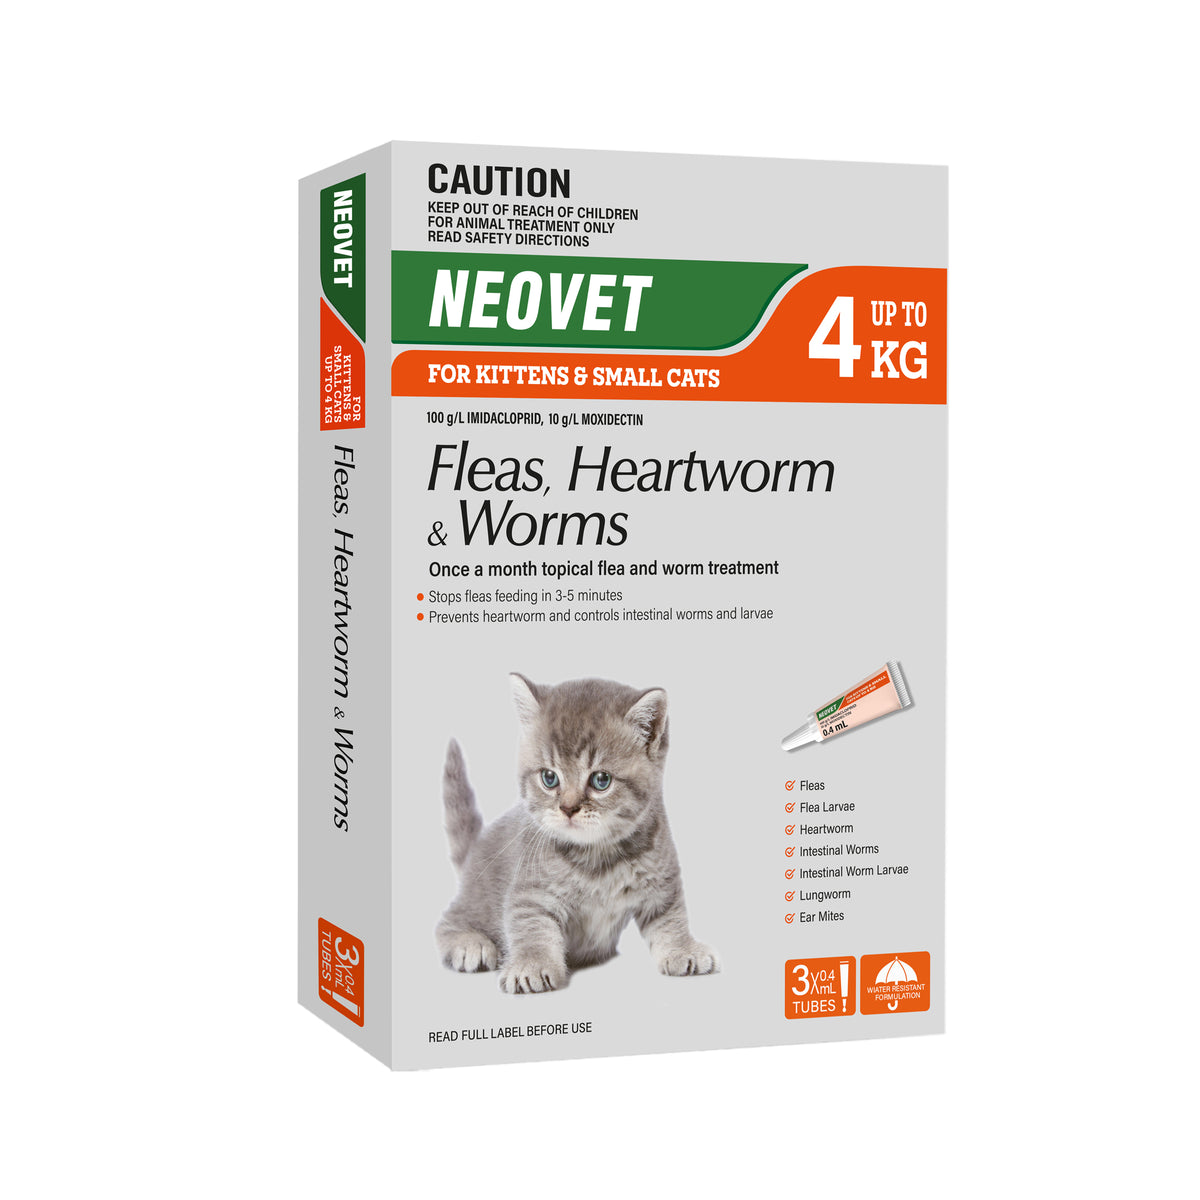 Neovet for Kittens &amp; Small Cats (Fleas, Heartworm &amp; Worms) up to 4kg